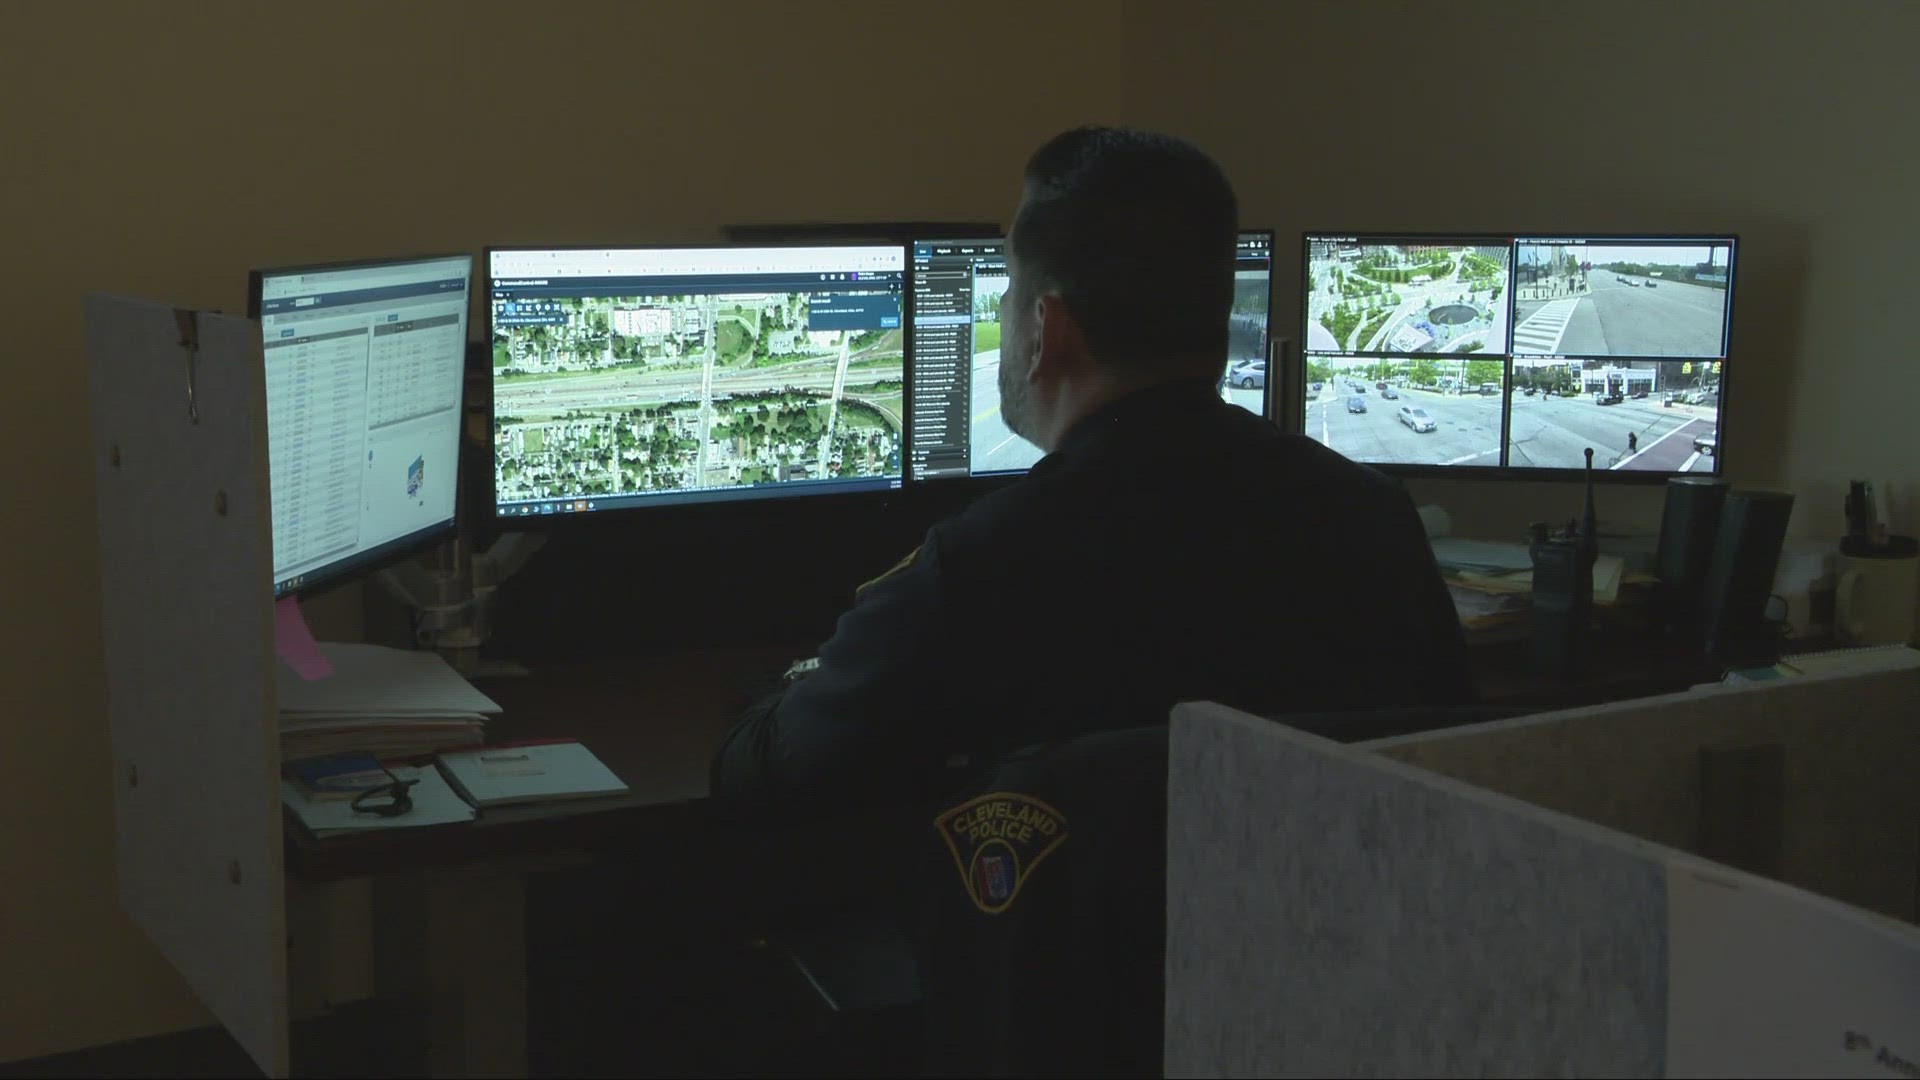 At the Real Time Crime Center, civilians and police utilize different technologies to respond to crimes across Cleveland.